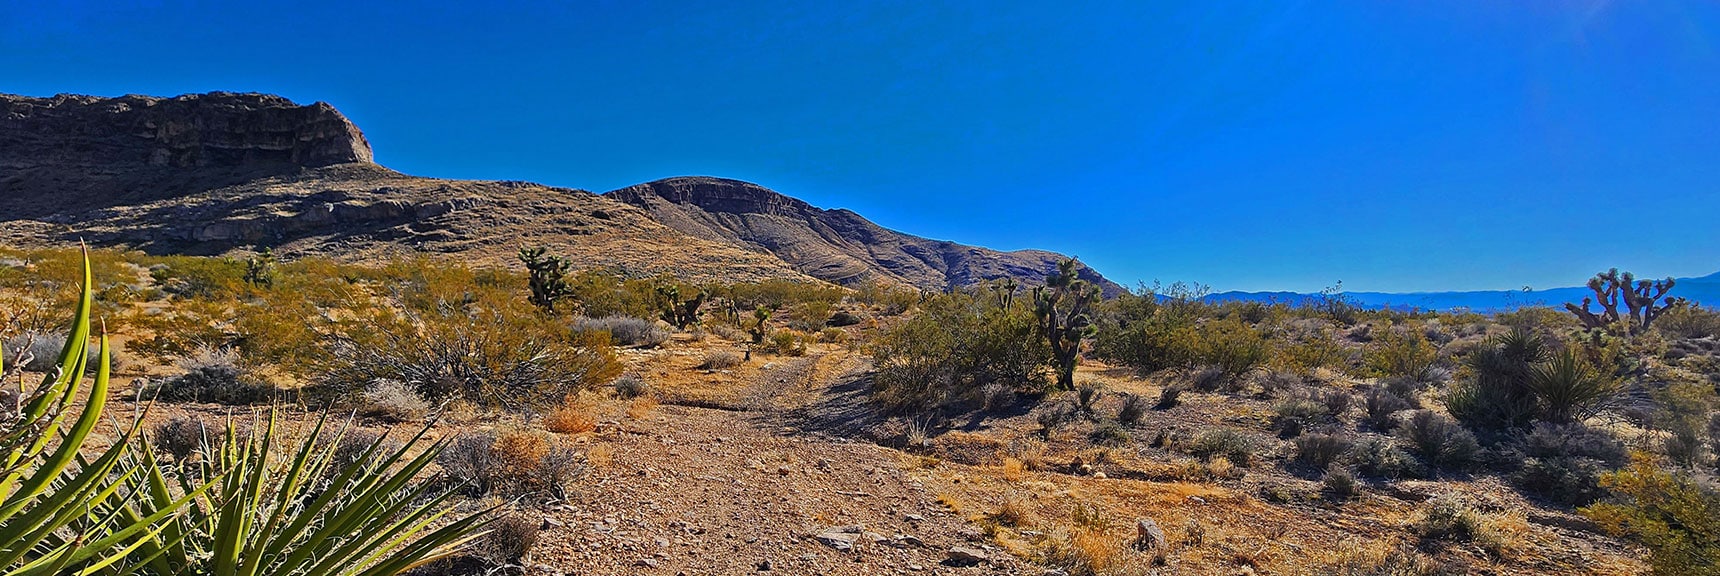 Connecting with the Westside Road Just Below the Entrance of Mule Spring Canyon. | Landmark Bluff Circuit | Lovell Canyon, Nevada